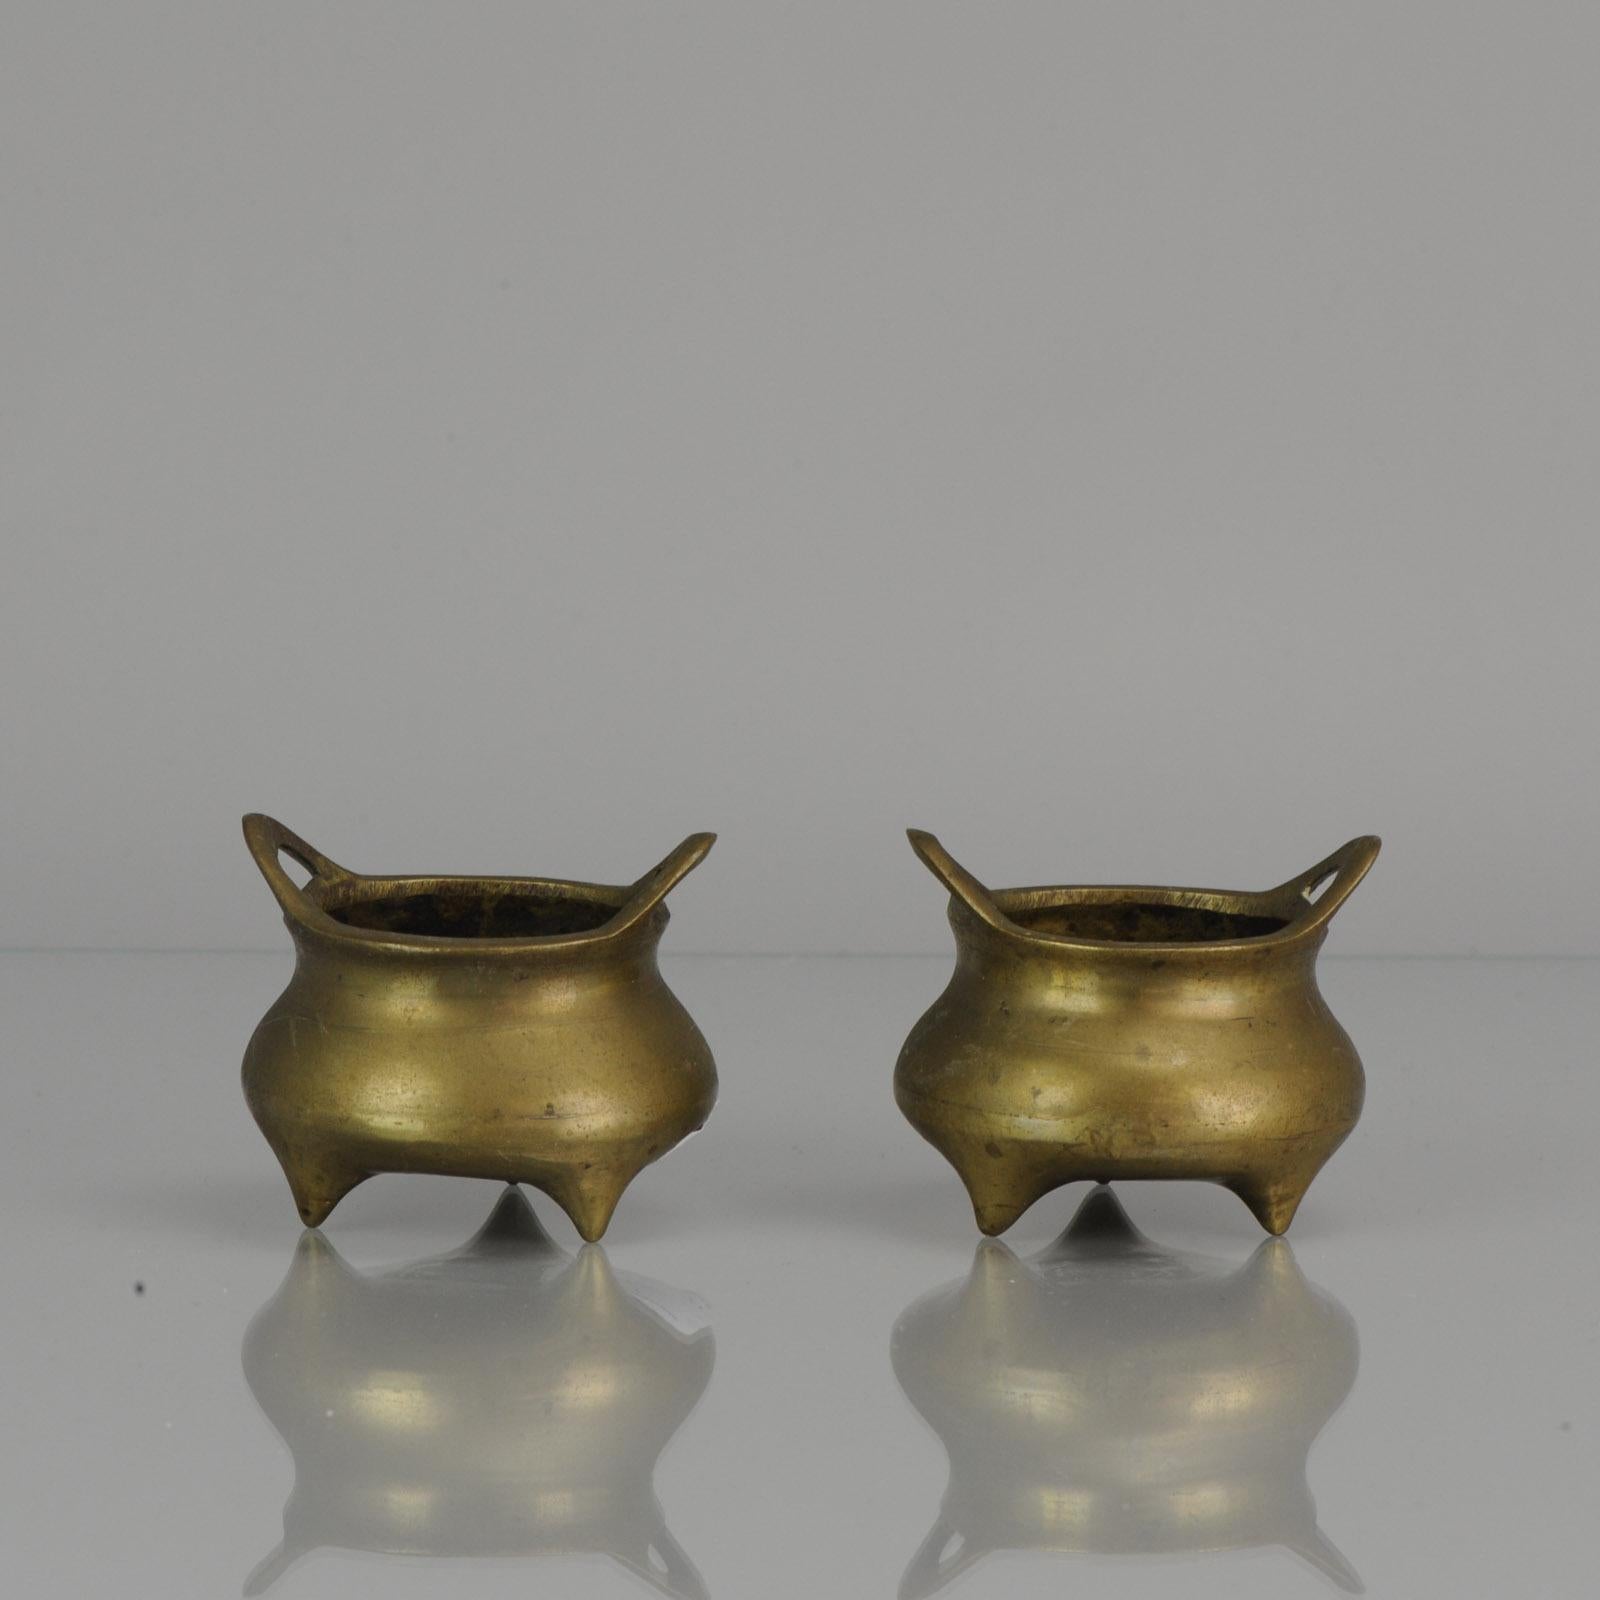 Pair of Tripod Censer 'Ding' Bronze Chengua Marked Late Qing, 1644-1911 In Good Condition For Sale In Amsterdam, Noord Holland